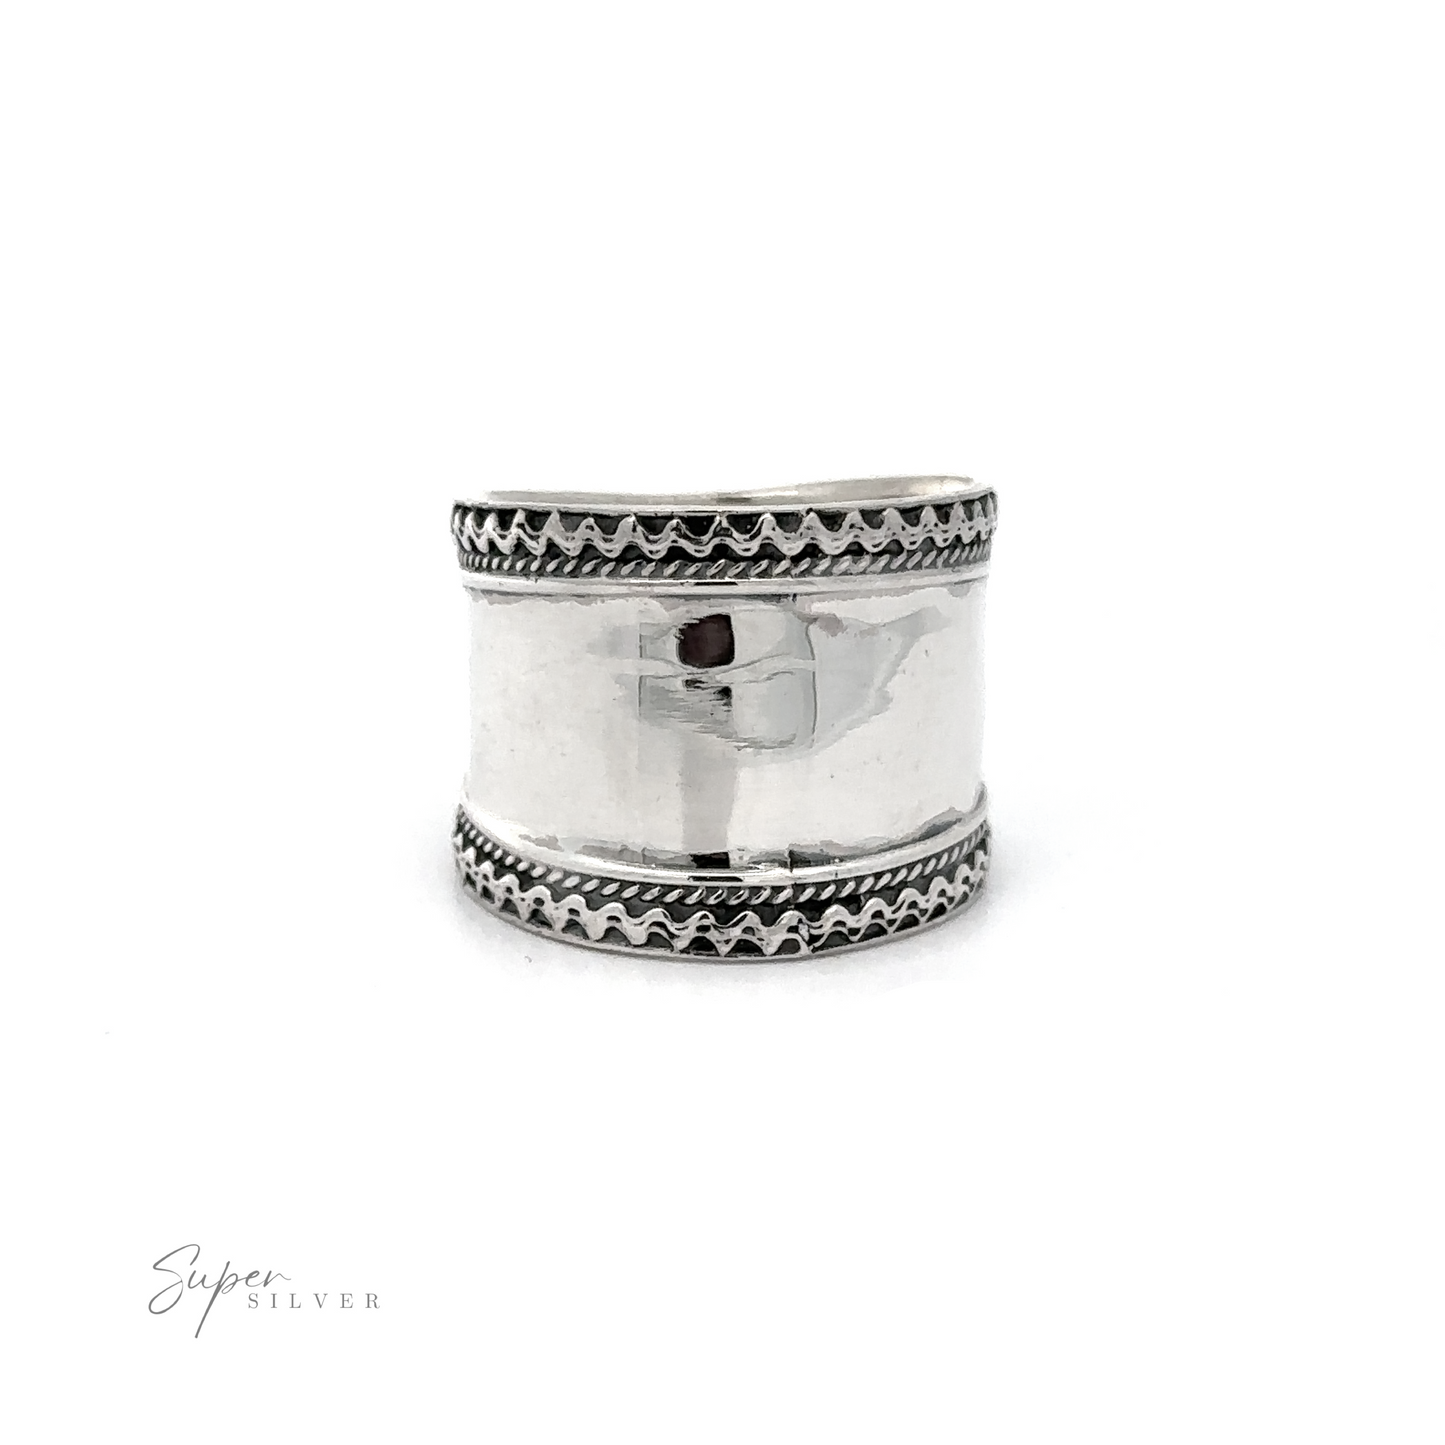 A Wide Silver Band with Etched Border with a rope pattern on it.